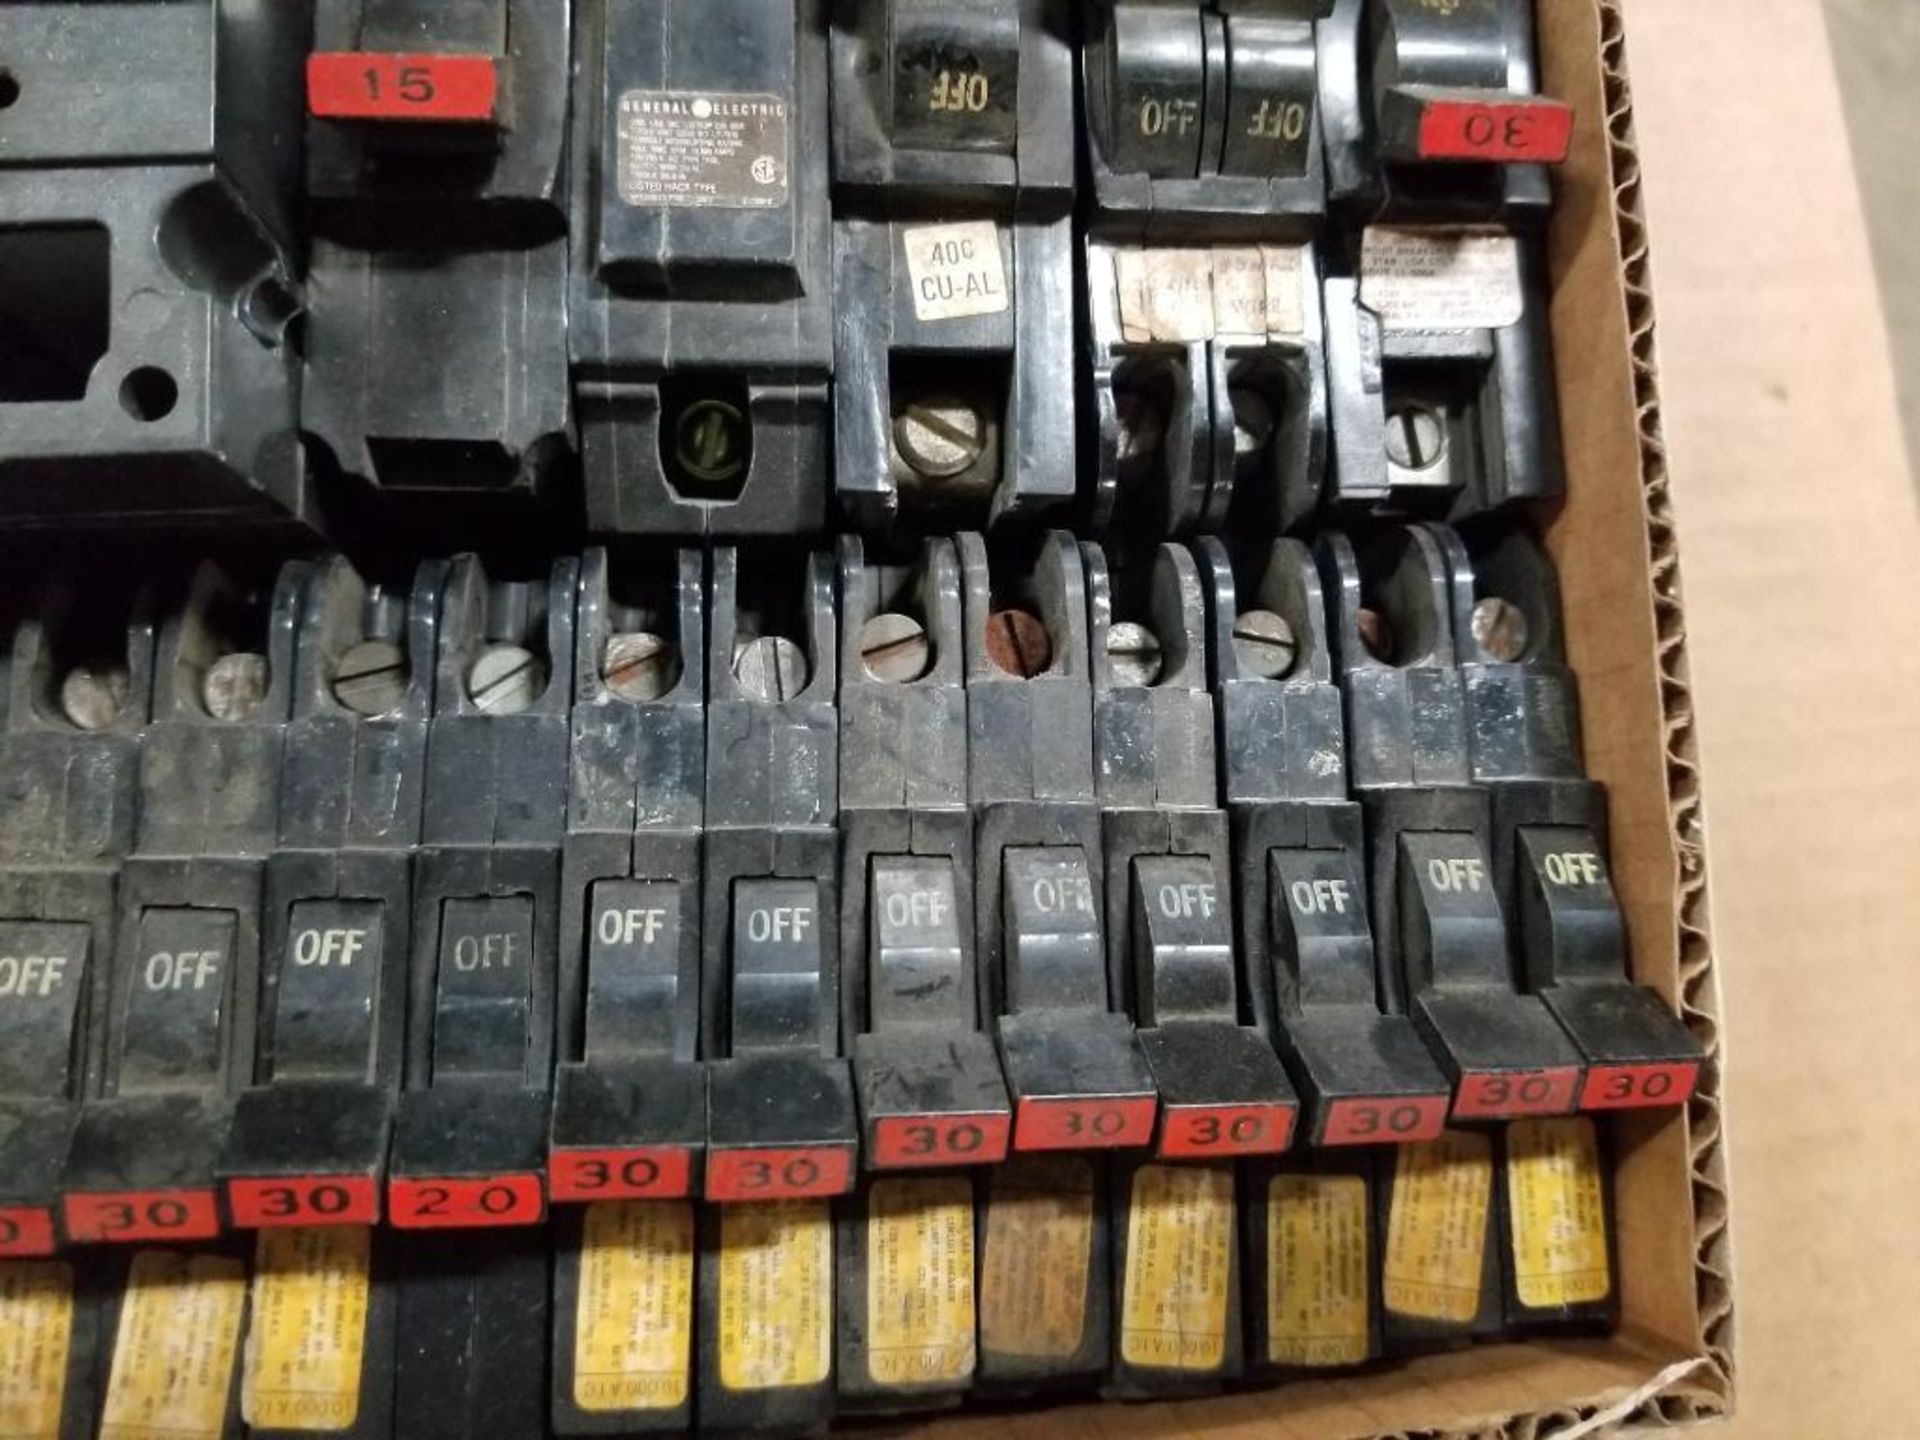 Assorted electrical breakers. Square-D, GE, Stab-lok. - Image 7 of 12